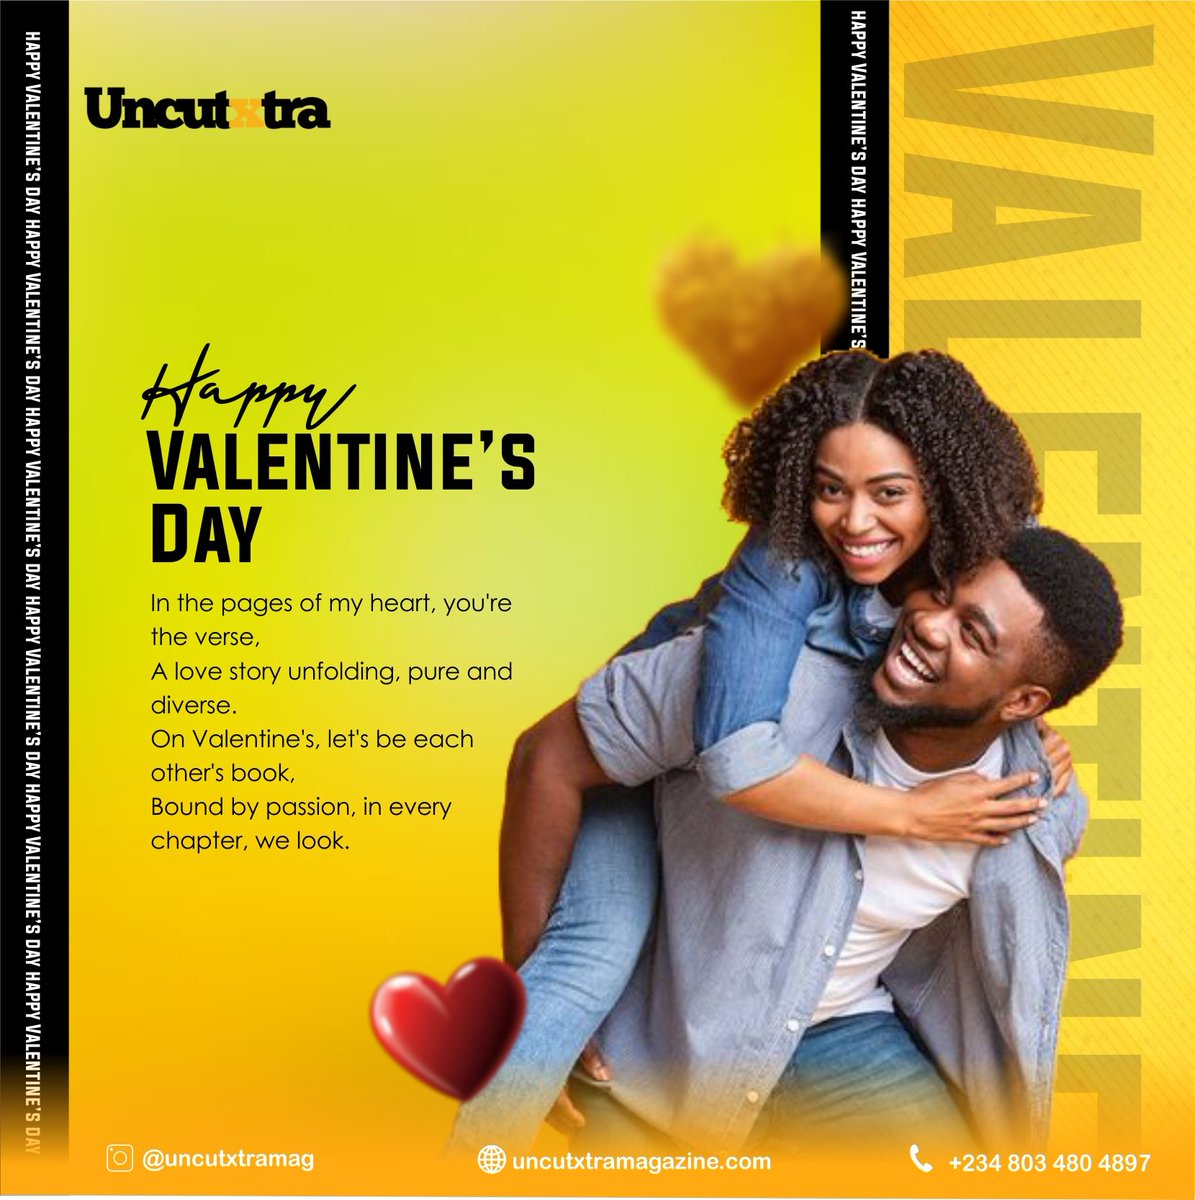 Unlock the pages of love with UncutXtra Magazine! 🥰 Wishing you a day filled with heart-fluttering moments and timeless romance ❤ ❤ #LoveStories #ValentinesDayIssue #love #magazine #uncutxtra